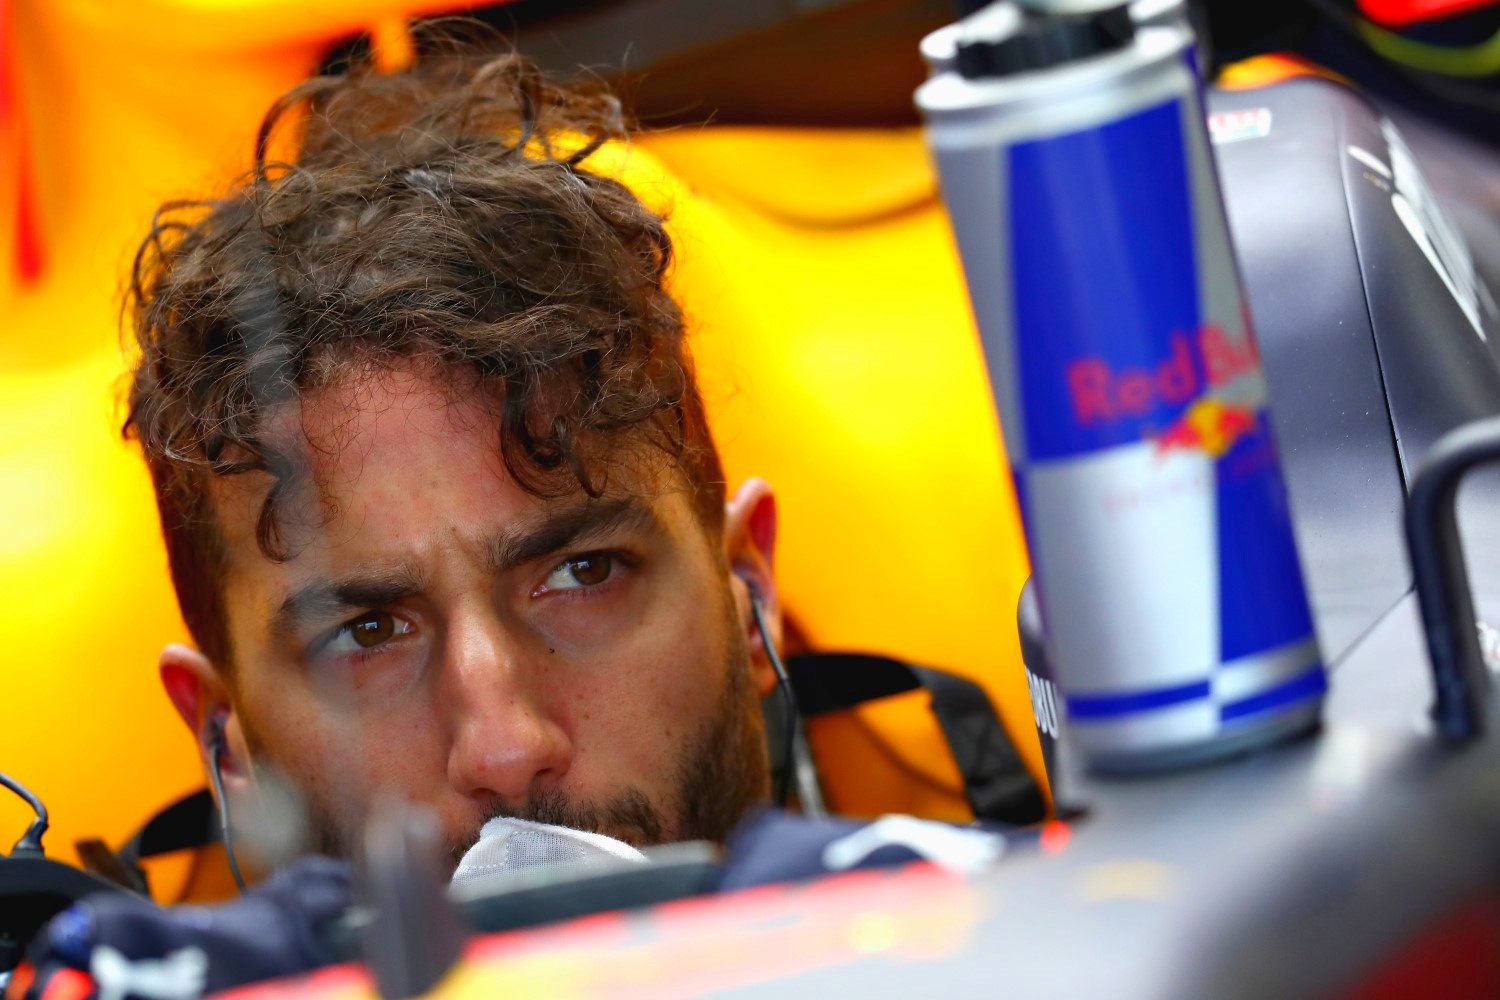 Ricciardo was frustrated that his car was so much slower than his teammates